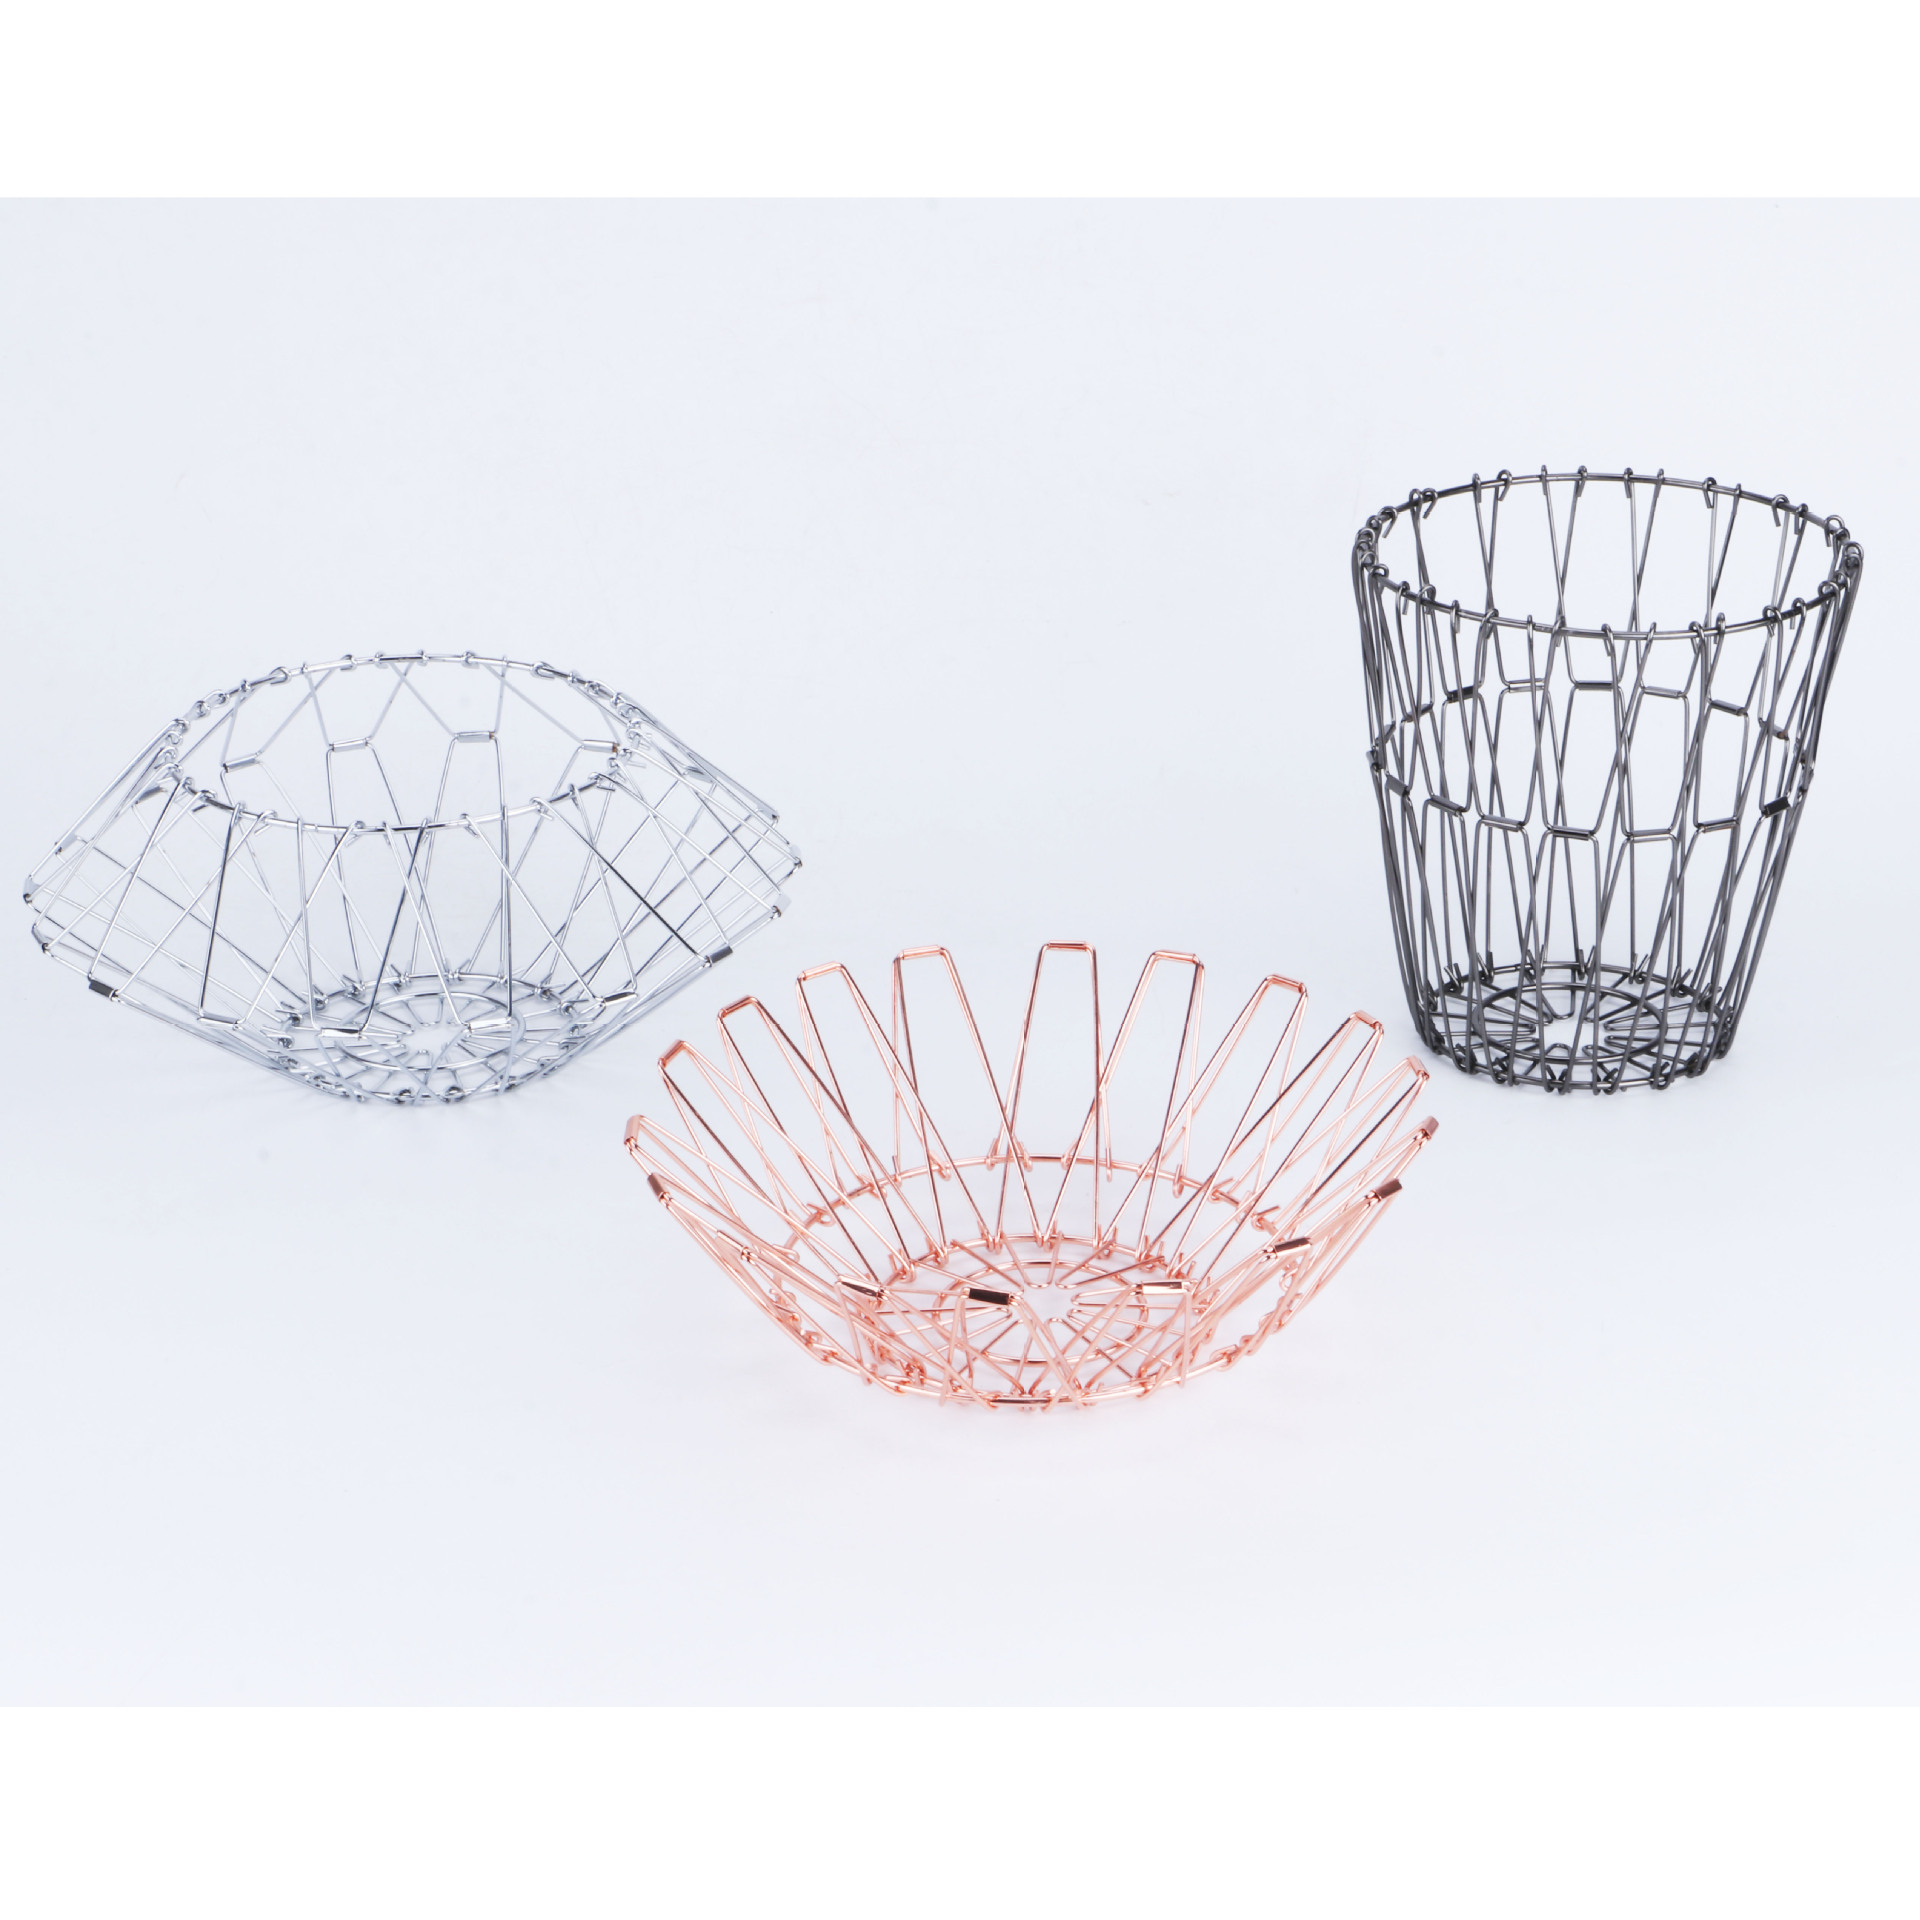 Factory Direct Sales Variety Lampshade Changeable Iron Wire Fruit Basket Retractable Creative Folding Storage Fruit Basket Lampshade Holder